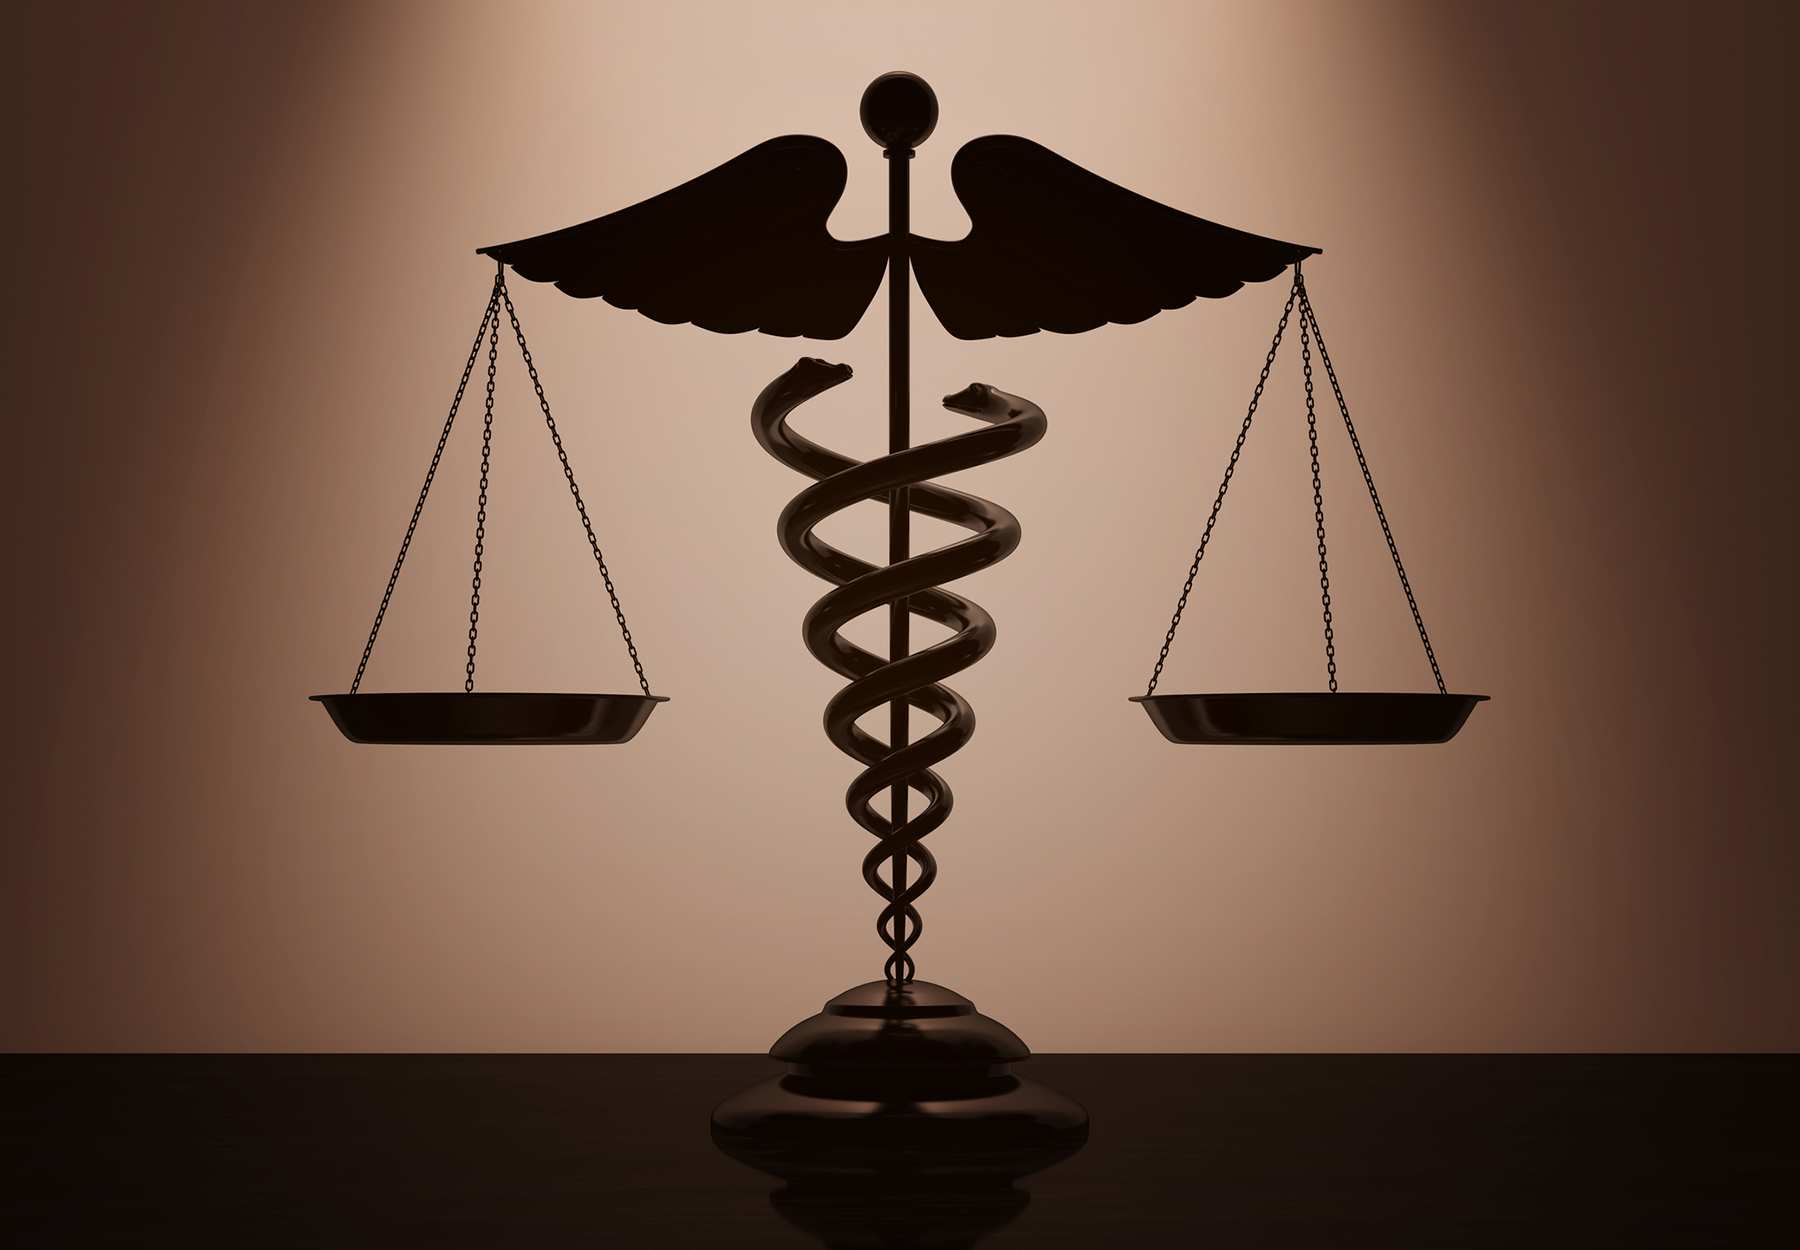 Medical Caduceus Symbol as Scales with backlight over Wall in dark room. 3d Rendering. Stock image.